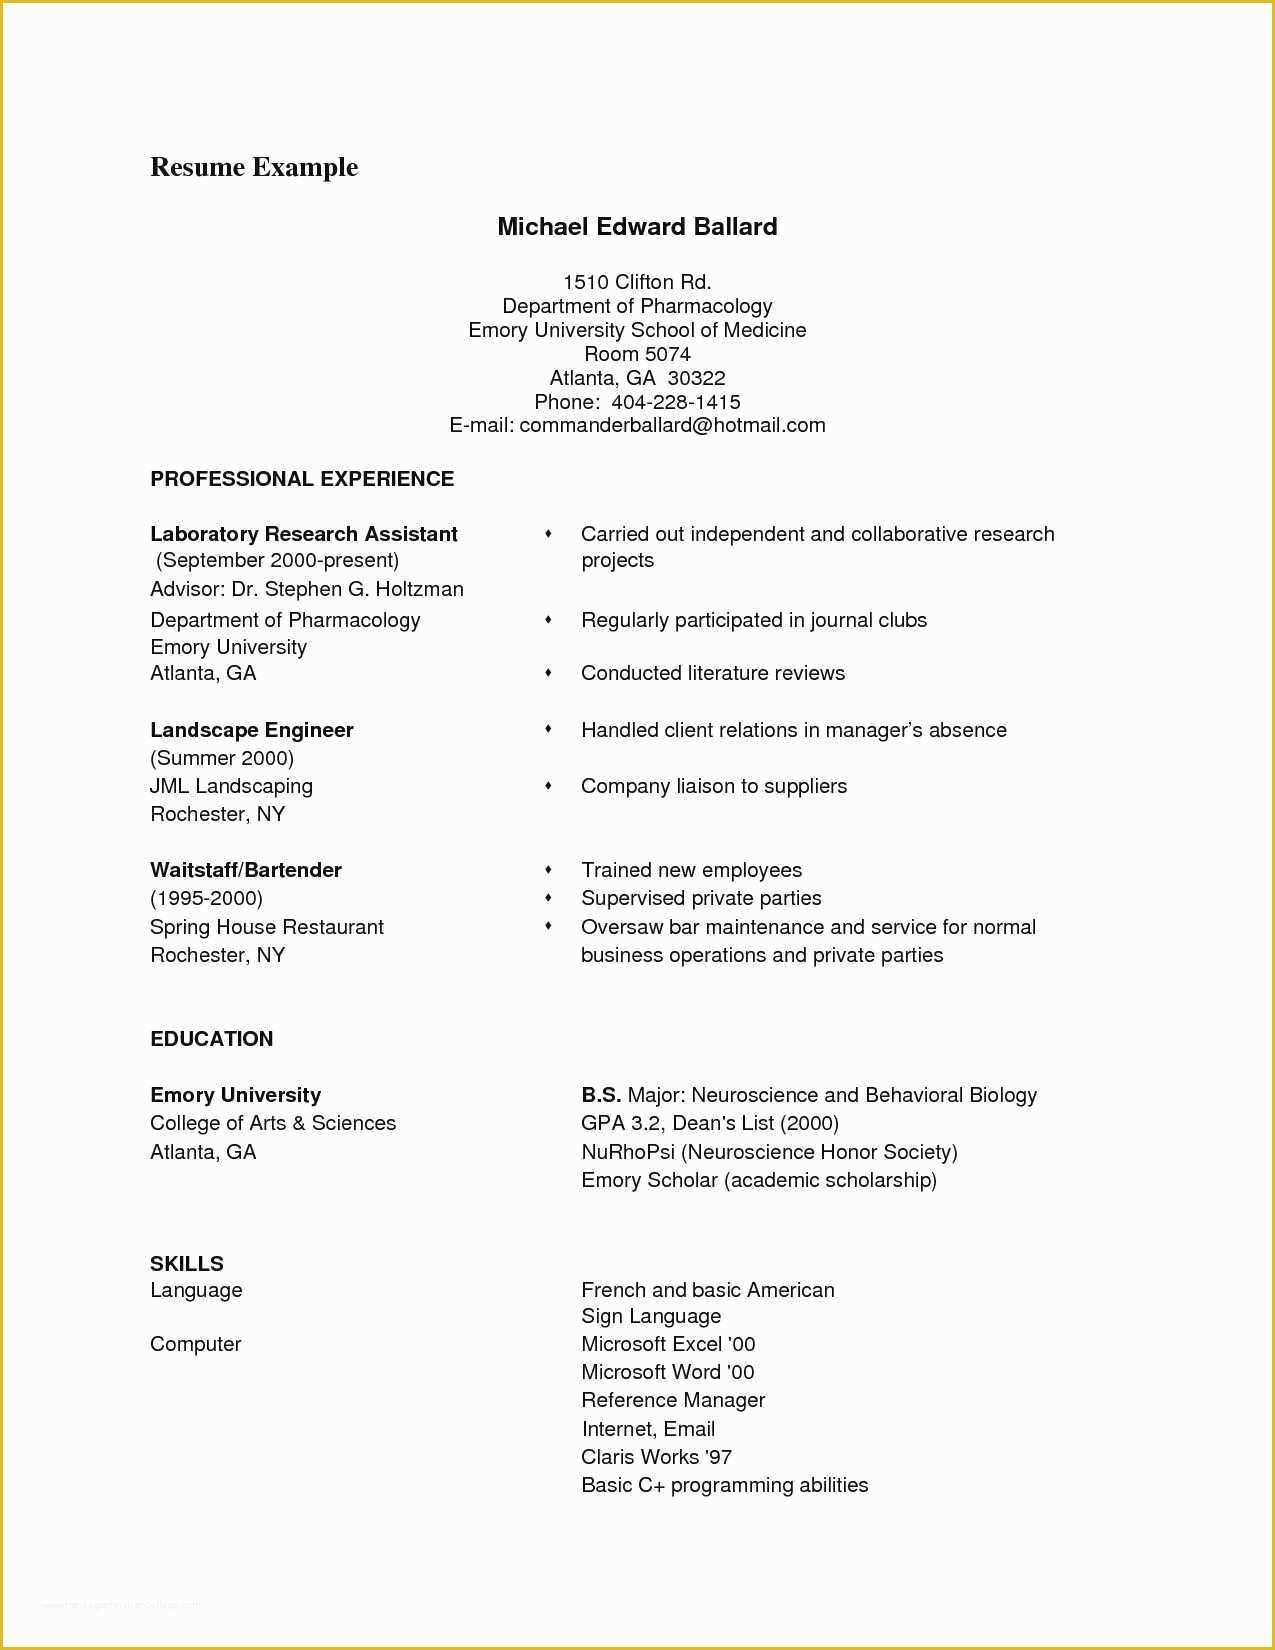 Resume Templates Microsoft Word 2010 Free Download Of How to Do A Resume Microsoft Word 2010